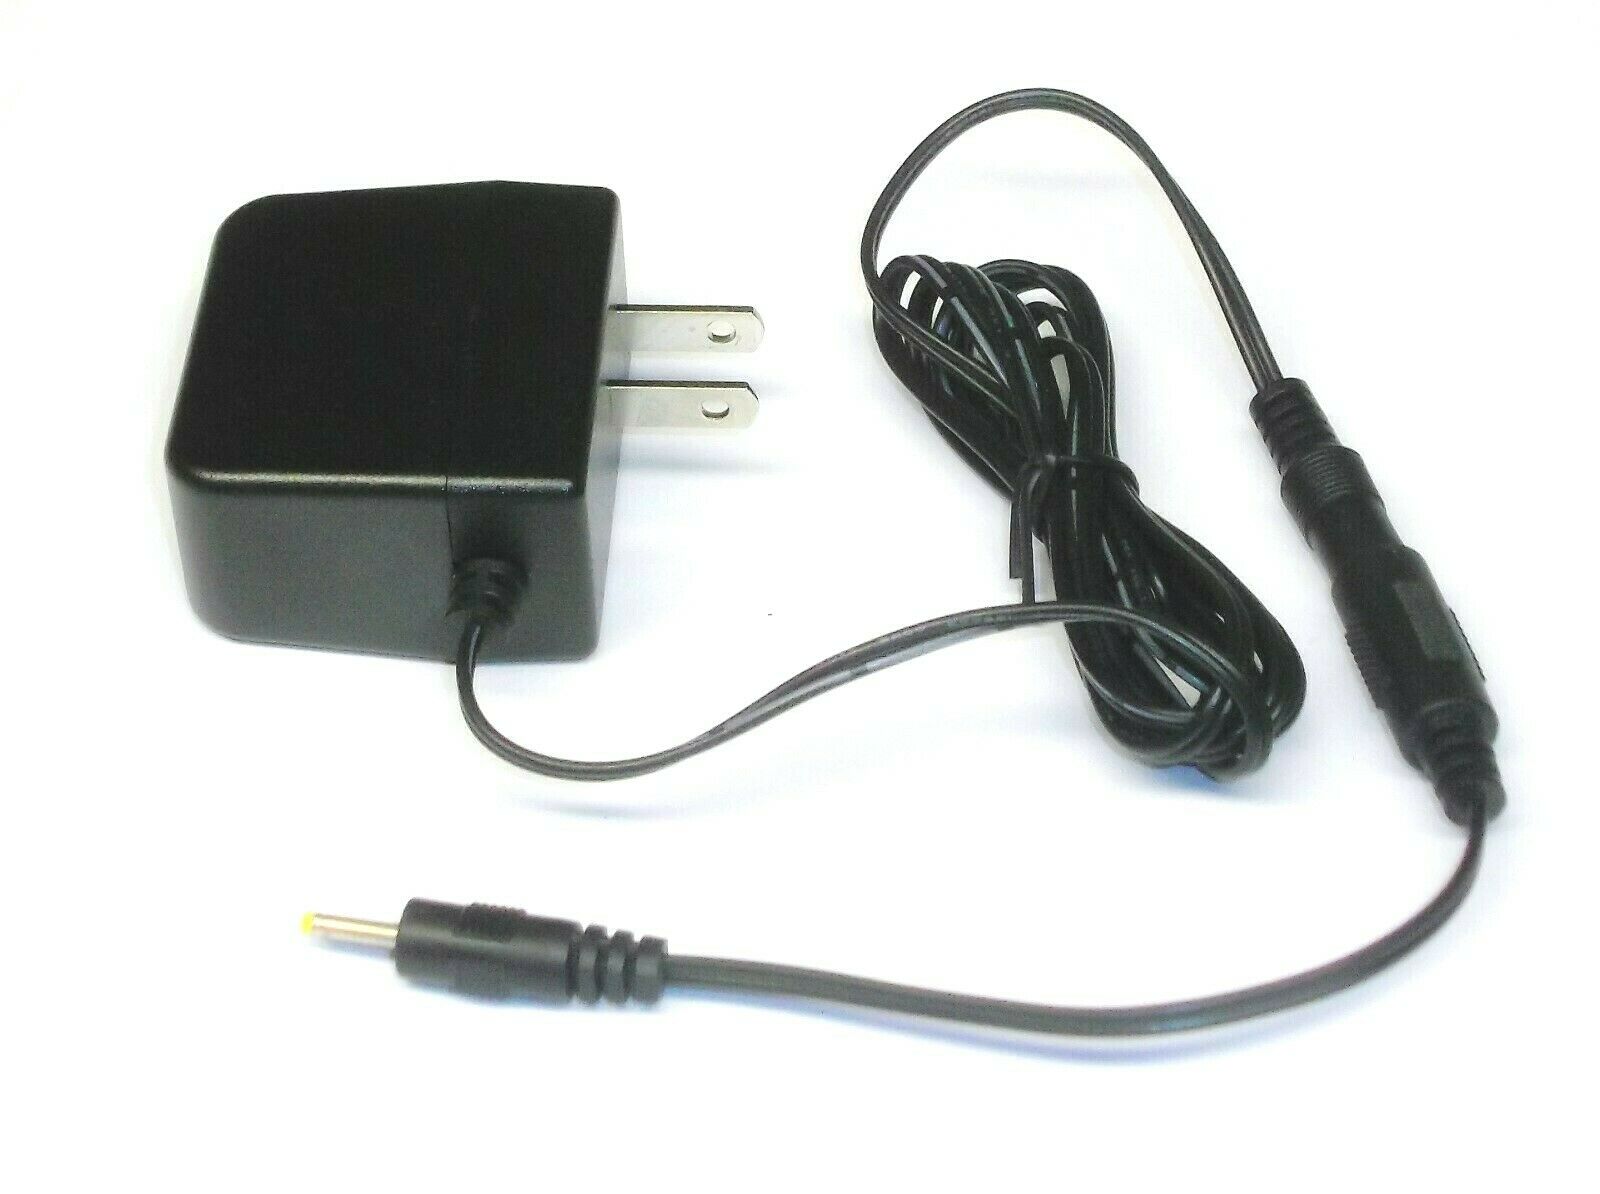 For ZIGLINT Z5 Z3 RK-2700500 Vacuum Power supply charger Adapter For: ZIGLINT Z5 Z3 RK-2700500 Adapter Input Voltage: